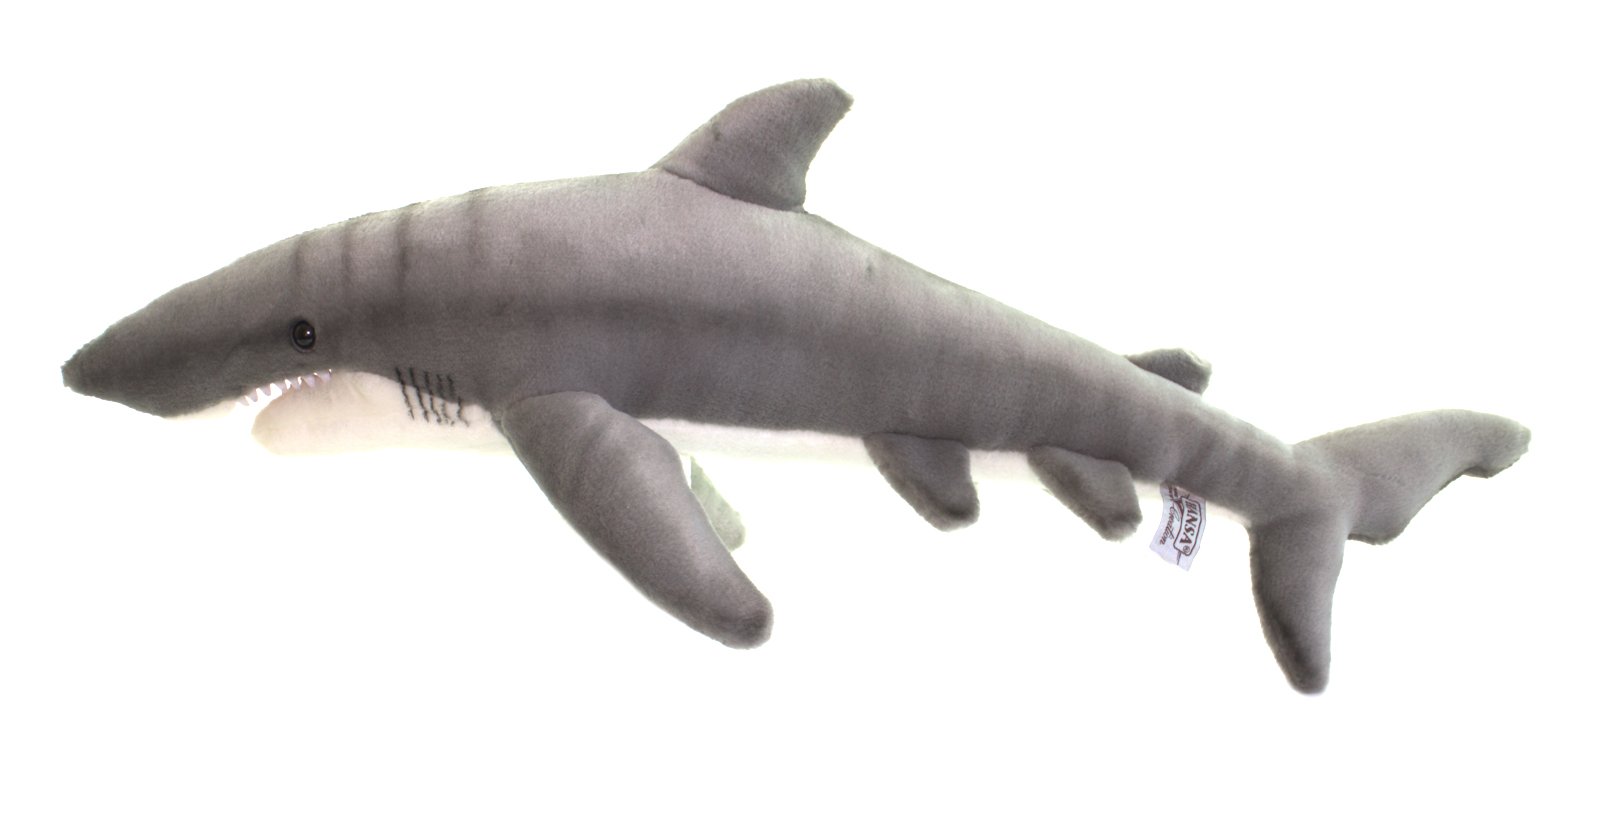 Soft Toy Great White Shark by Hansa (64cm) 5069 | Lincrafts